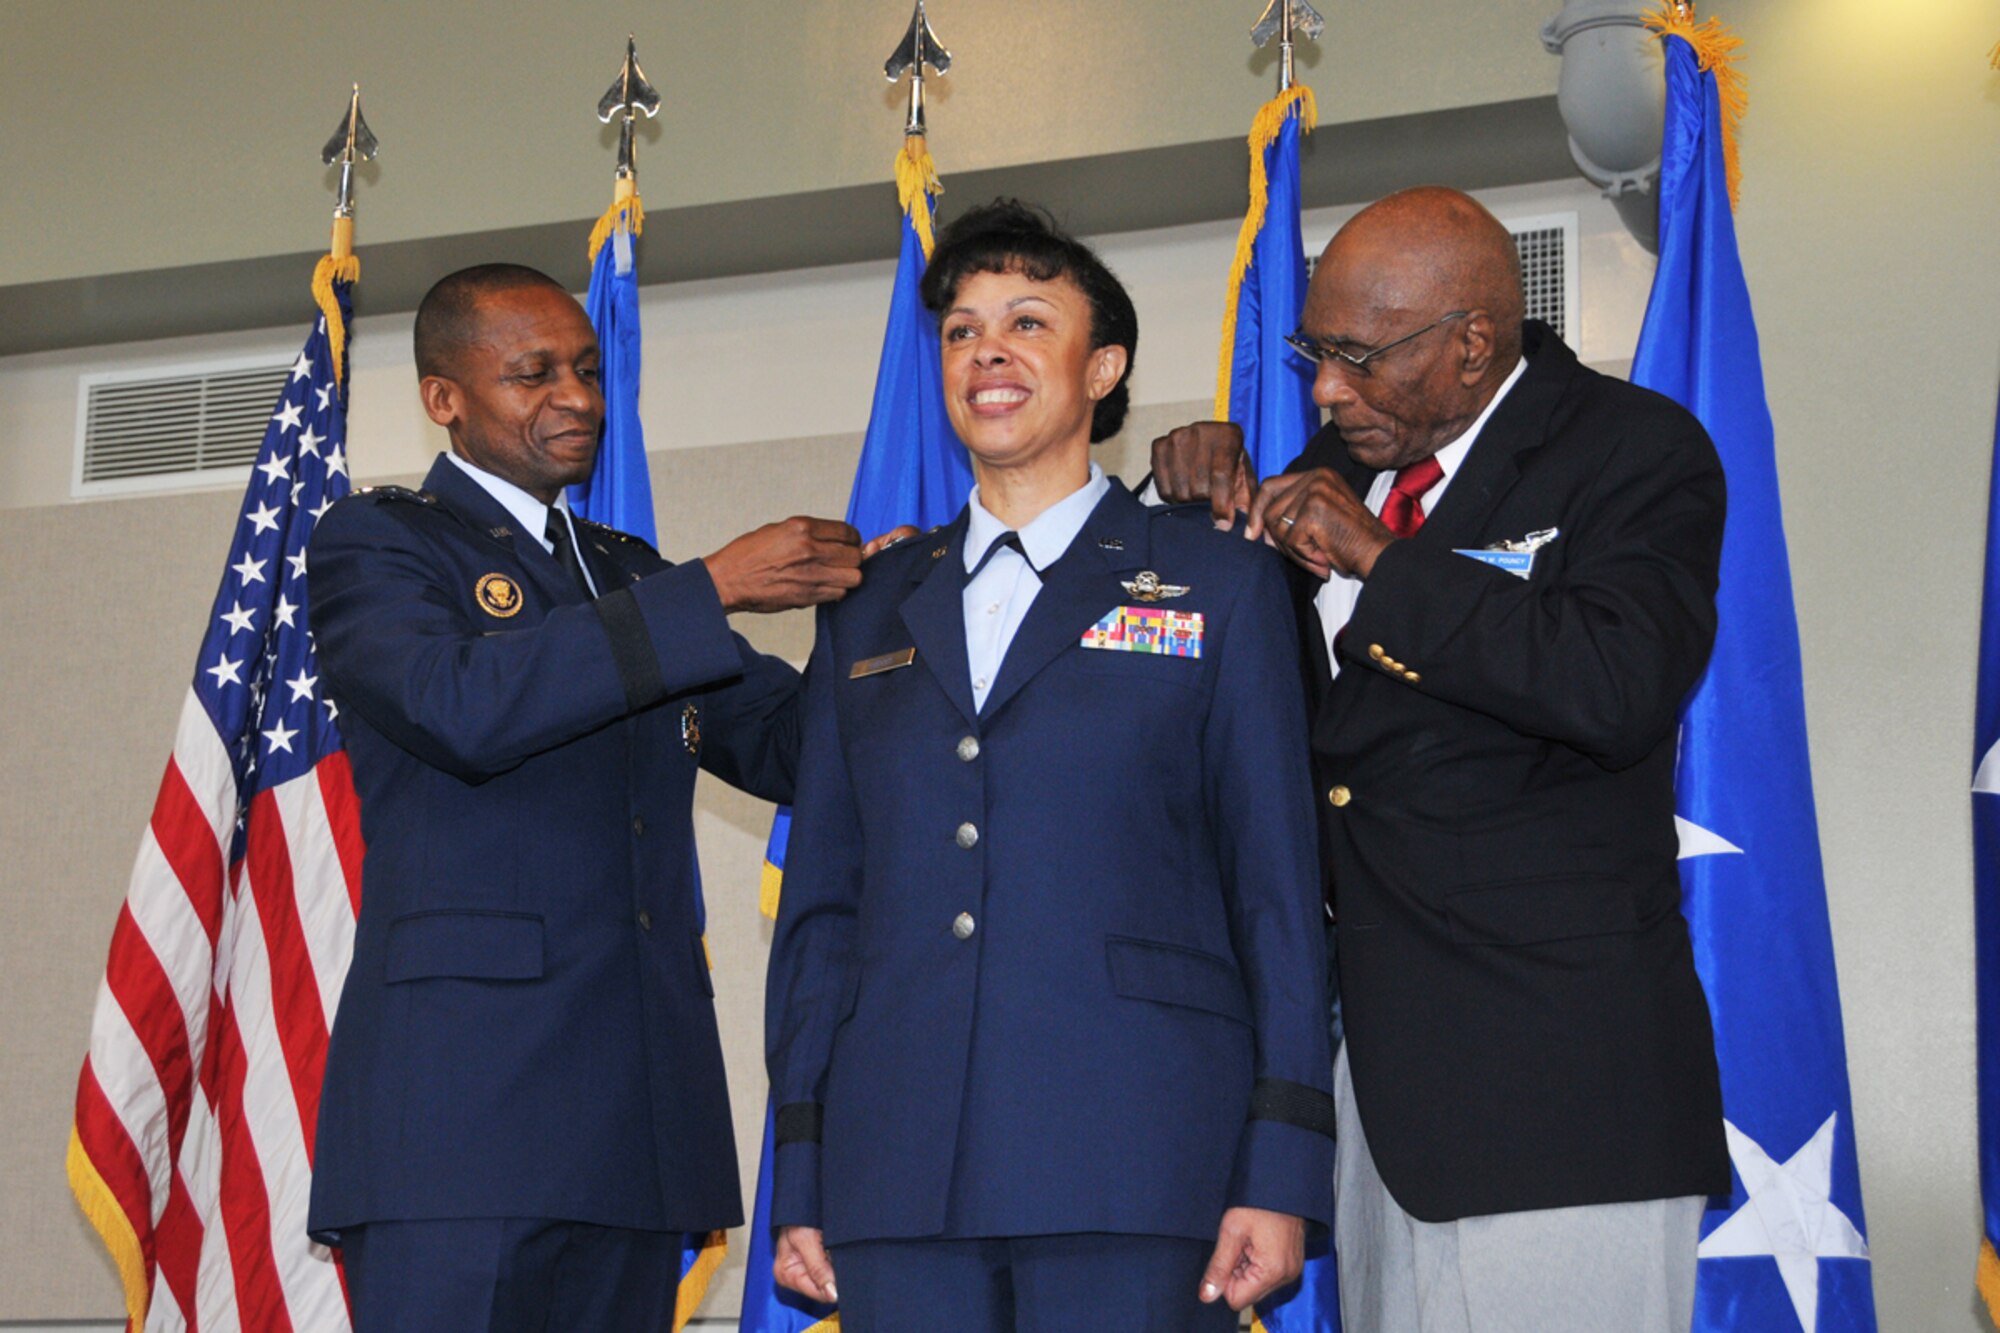 Gen. Darren W. McDew, Air Mobility Command commander, and Hillard W. Pouncy, original Tuskegee Airman, pin stars on Maj. Gen. Stayce D. Harris, during a promotion ceremony Aug. 9, 2014 at Dobbins Air Reserve Base, Ga. Harris assumed command of 22nd Air Force and will oversee 15,000 Reservists and 105 unit-equipped aircraft. She will have command supervision of the Reserve's air mobility operations and other vital mission sets. Reserve aircrews within 22nd Air Force fly a variety of missions to include aerial spraying, fire suppression, hurricane hunters to troop transport utilizing the C-130 Hercules. (U.S. Air Force photo/Staff Sgt. Jaclyn McDonald)